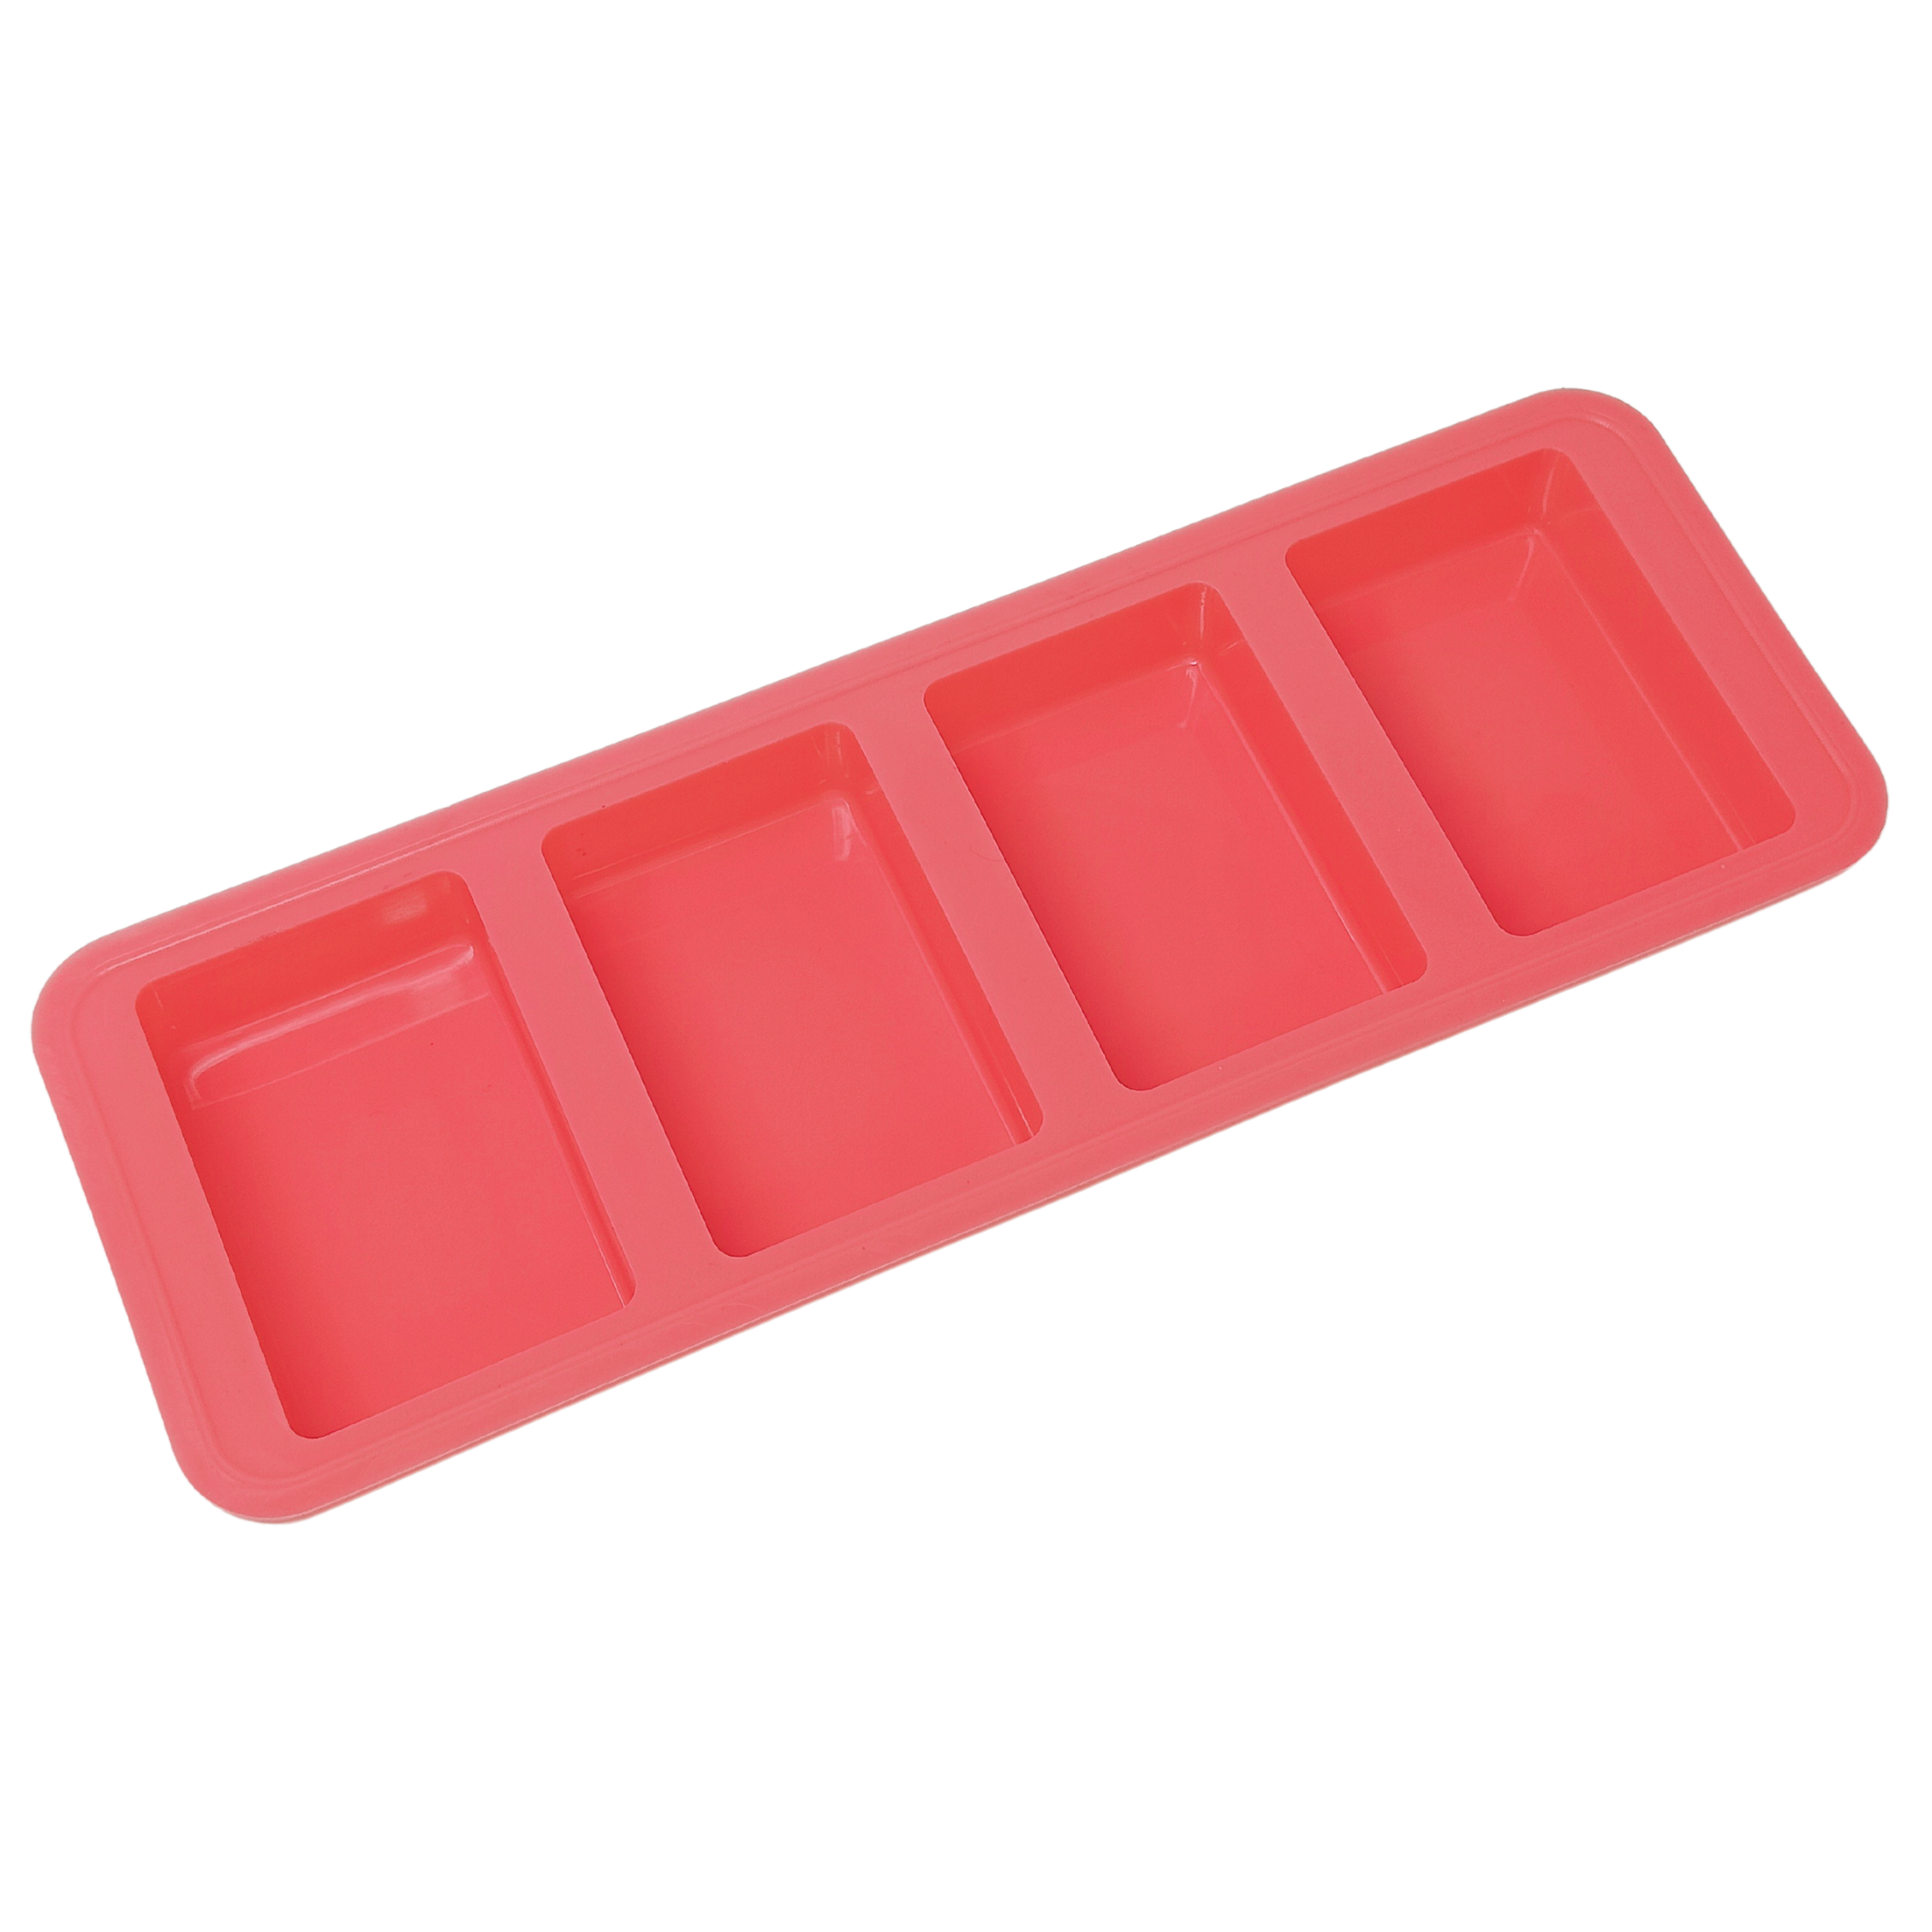 80ml Rectangle Soap Mould - The Mould Story